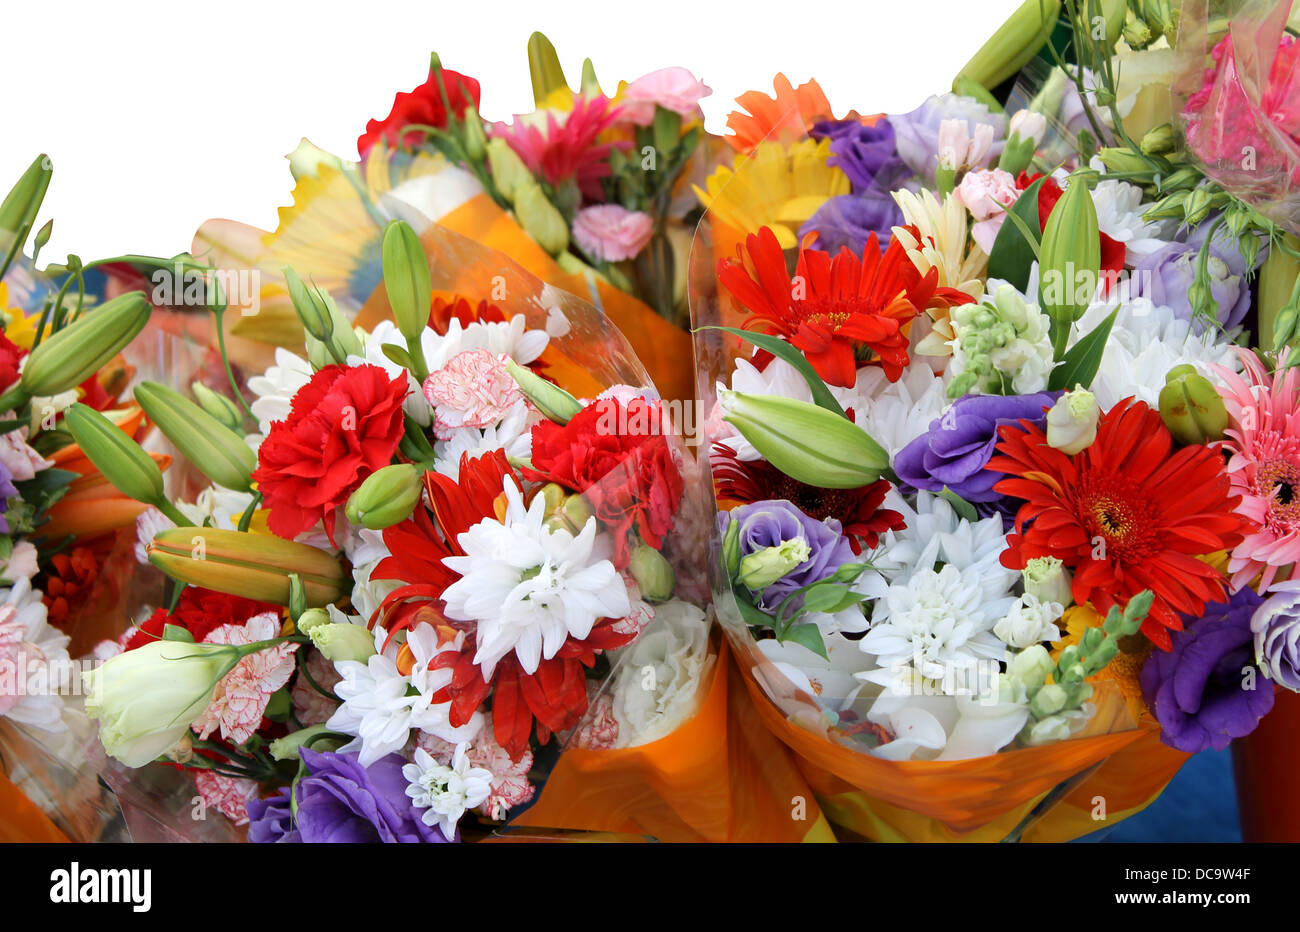 Bouquets of colorful flowers isolated on a white background. Stock Photo